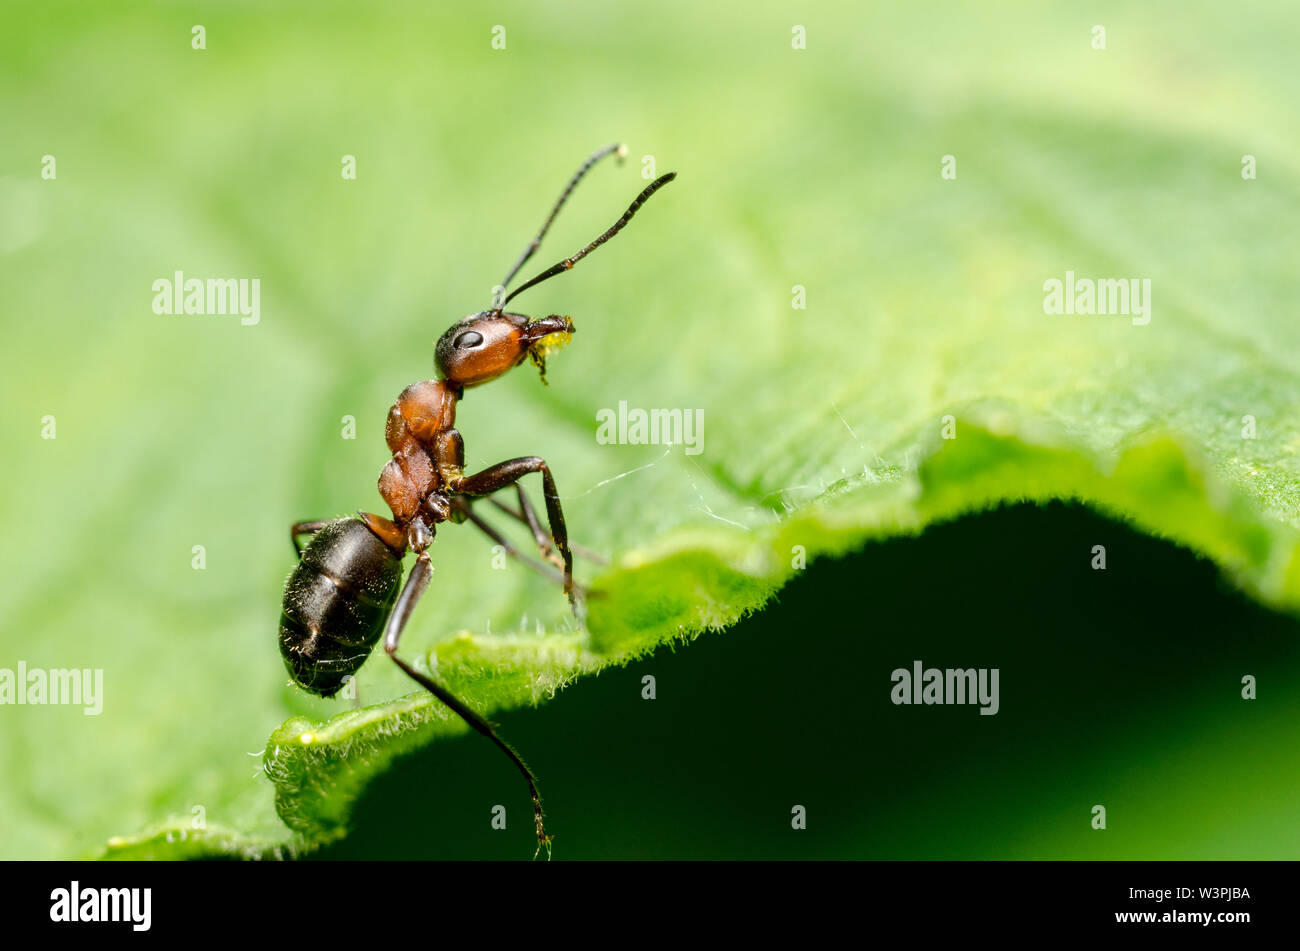 Formica rufa, macro of a carpenter ant in the forest on a green leaf, Bavaria, Germany, Europe Stock Photo